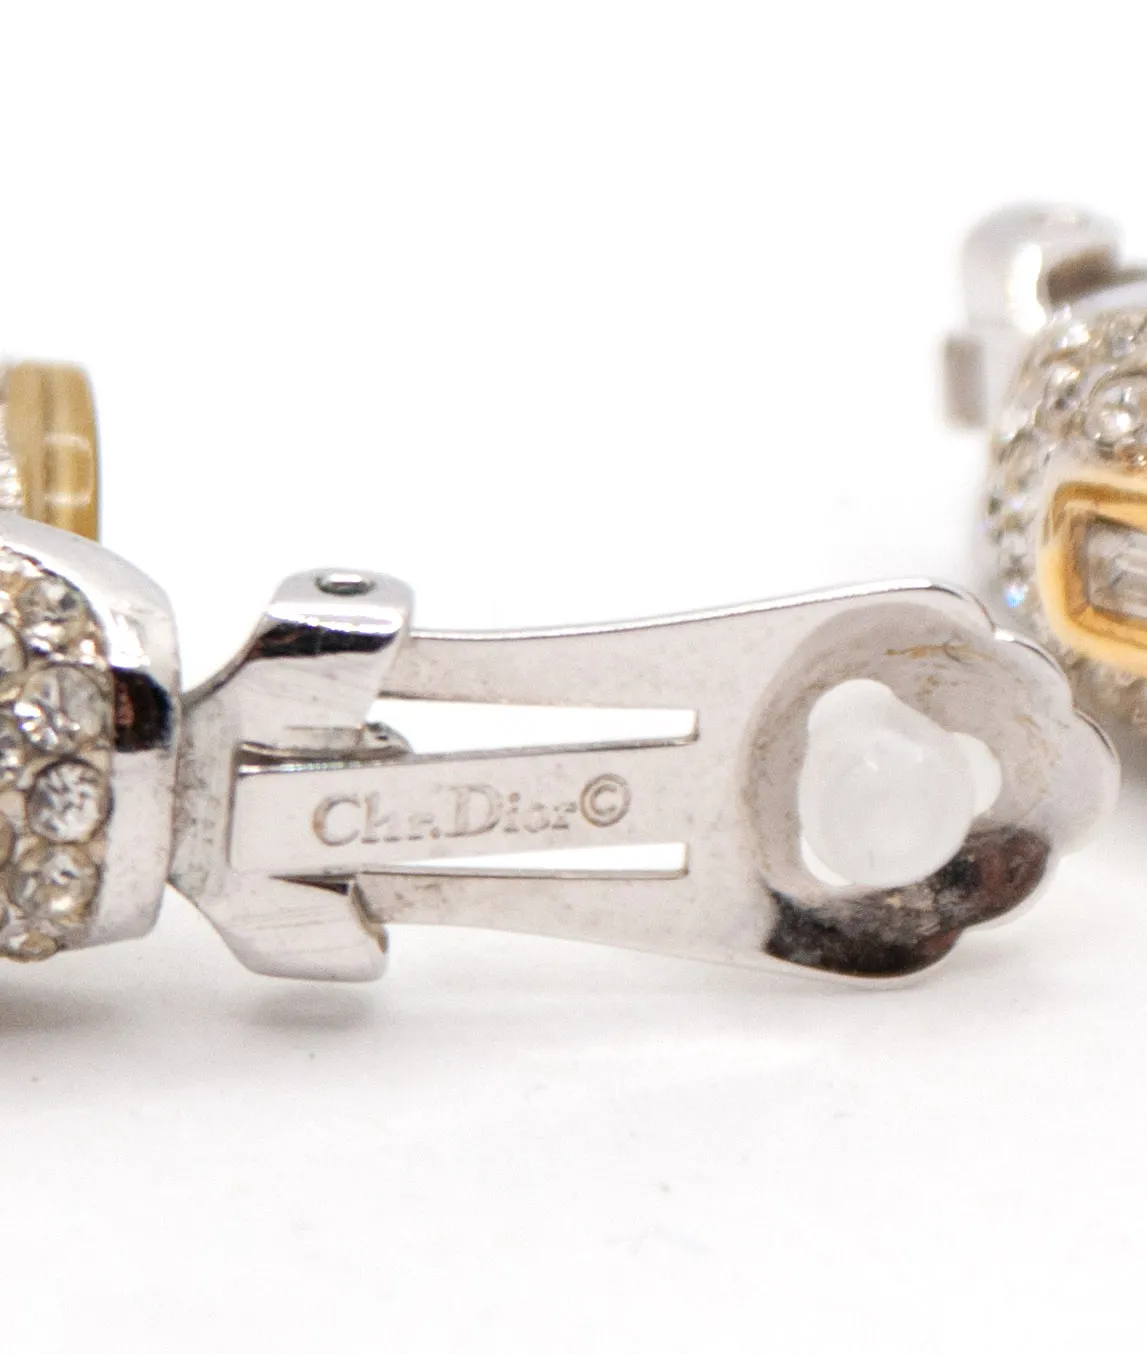 Chr. Dior stamp on earring clip